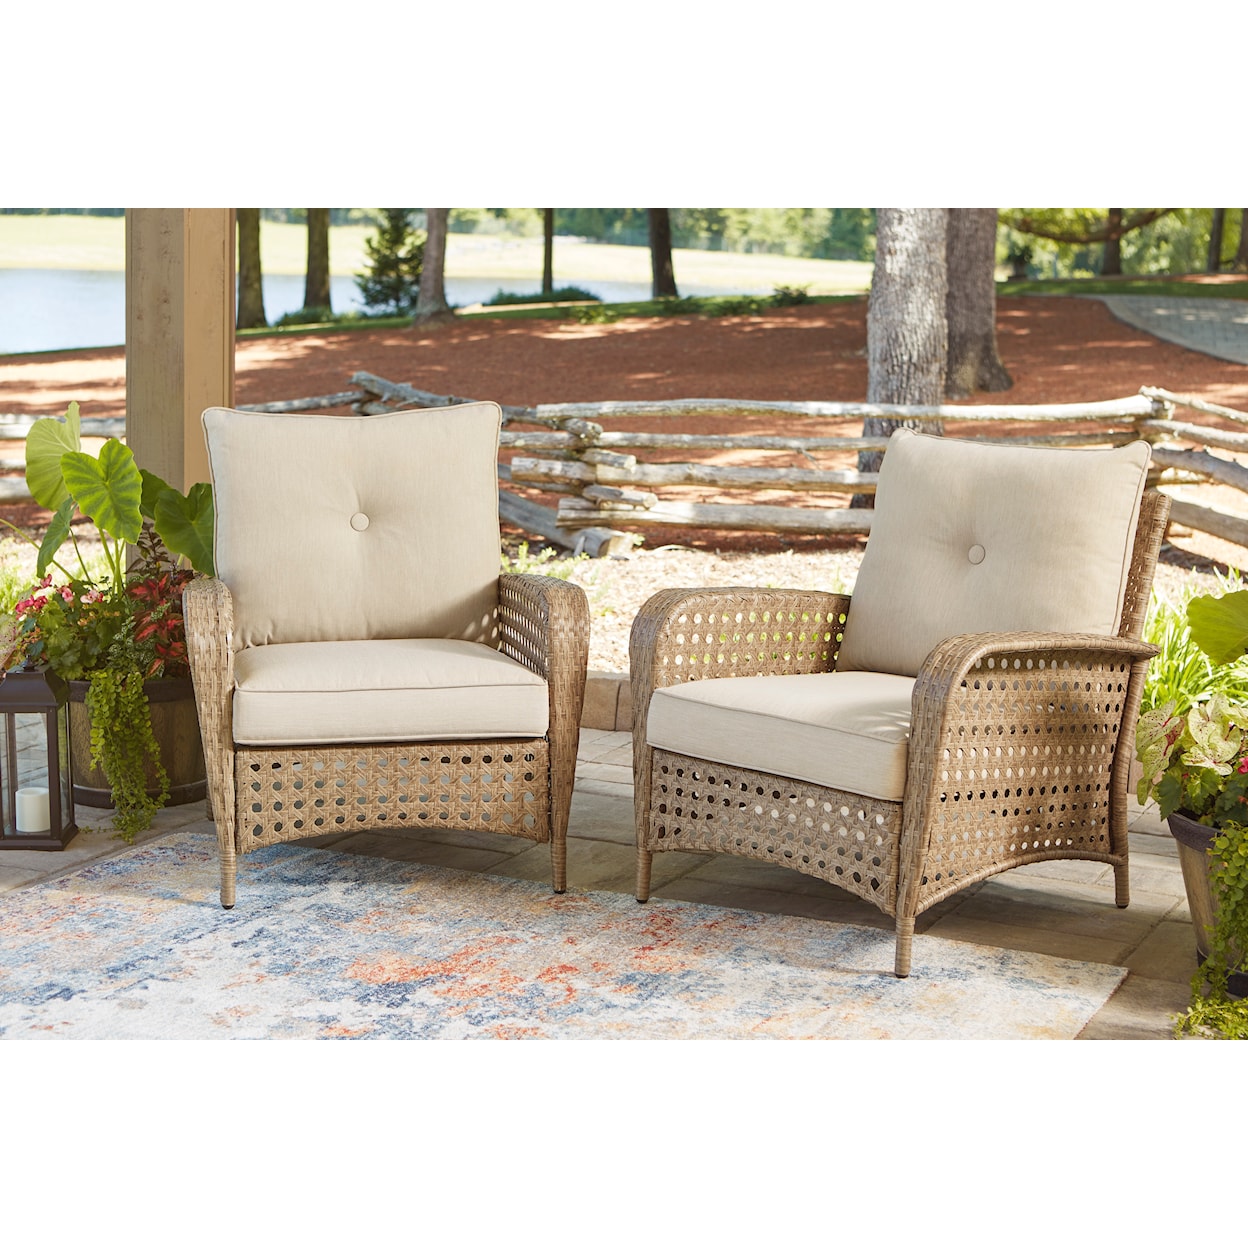 Signature Design by Ashley Braylee Set of 2 Lounge Chairs with Cushion